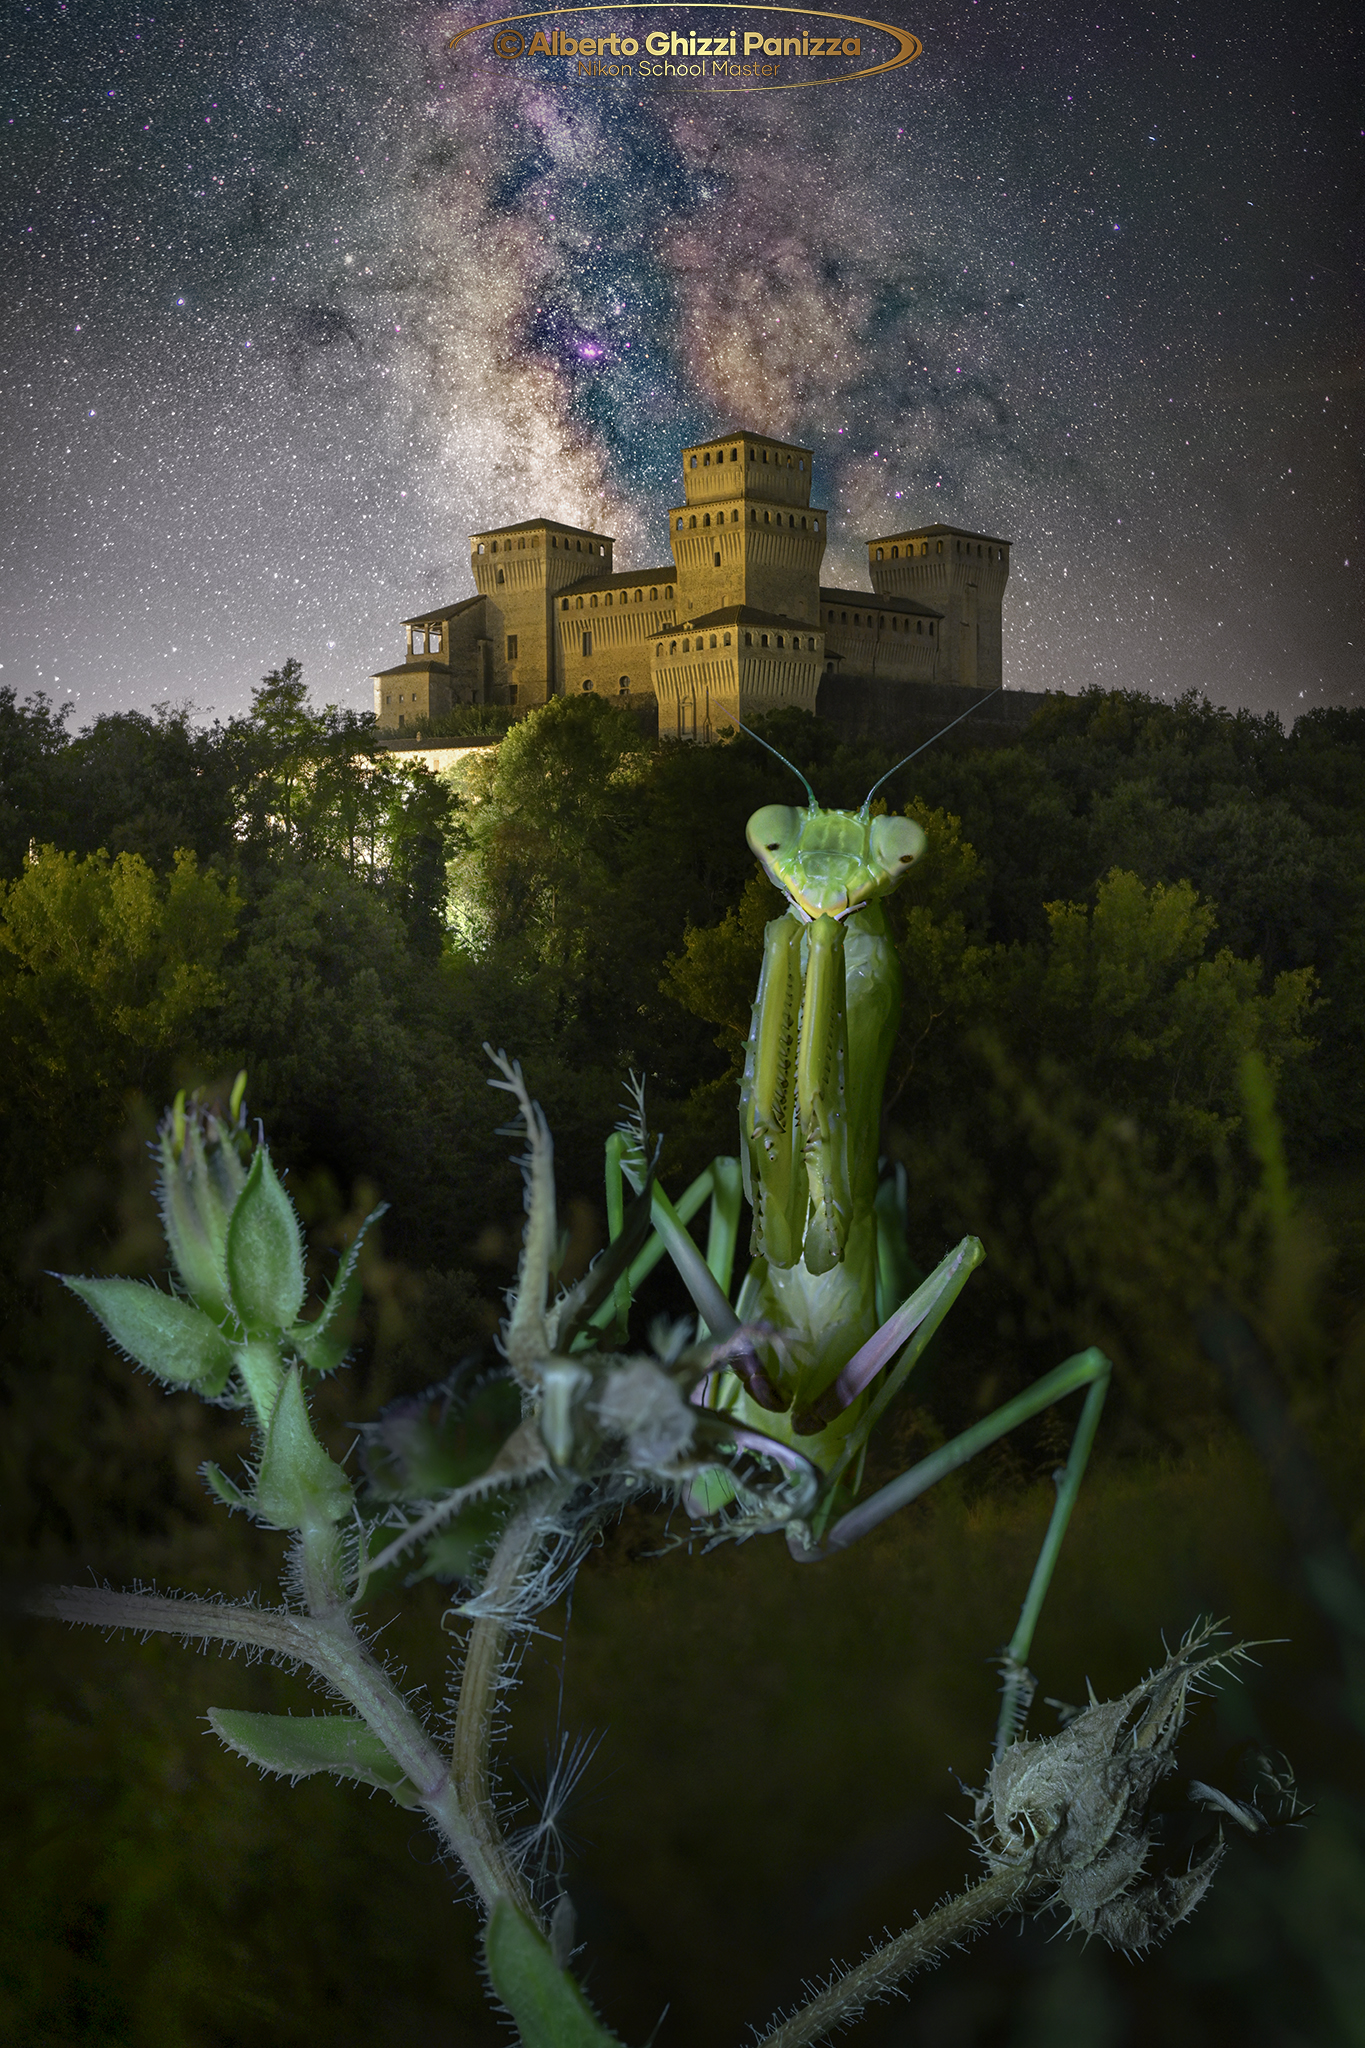 The mantis, the castle and the Milky Way...